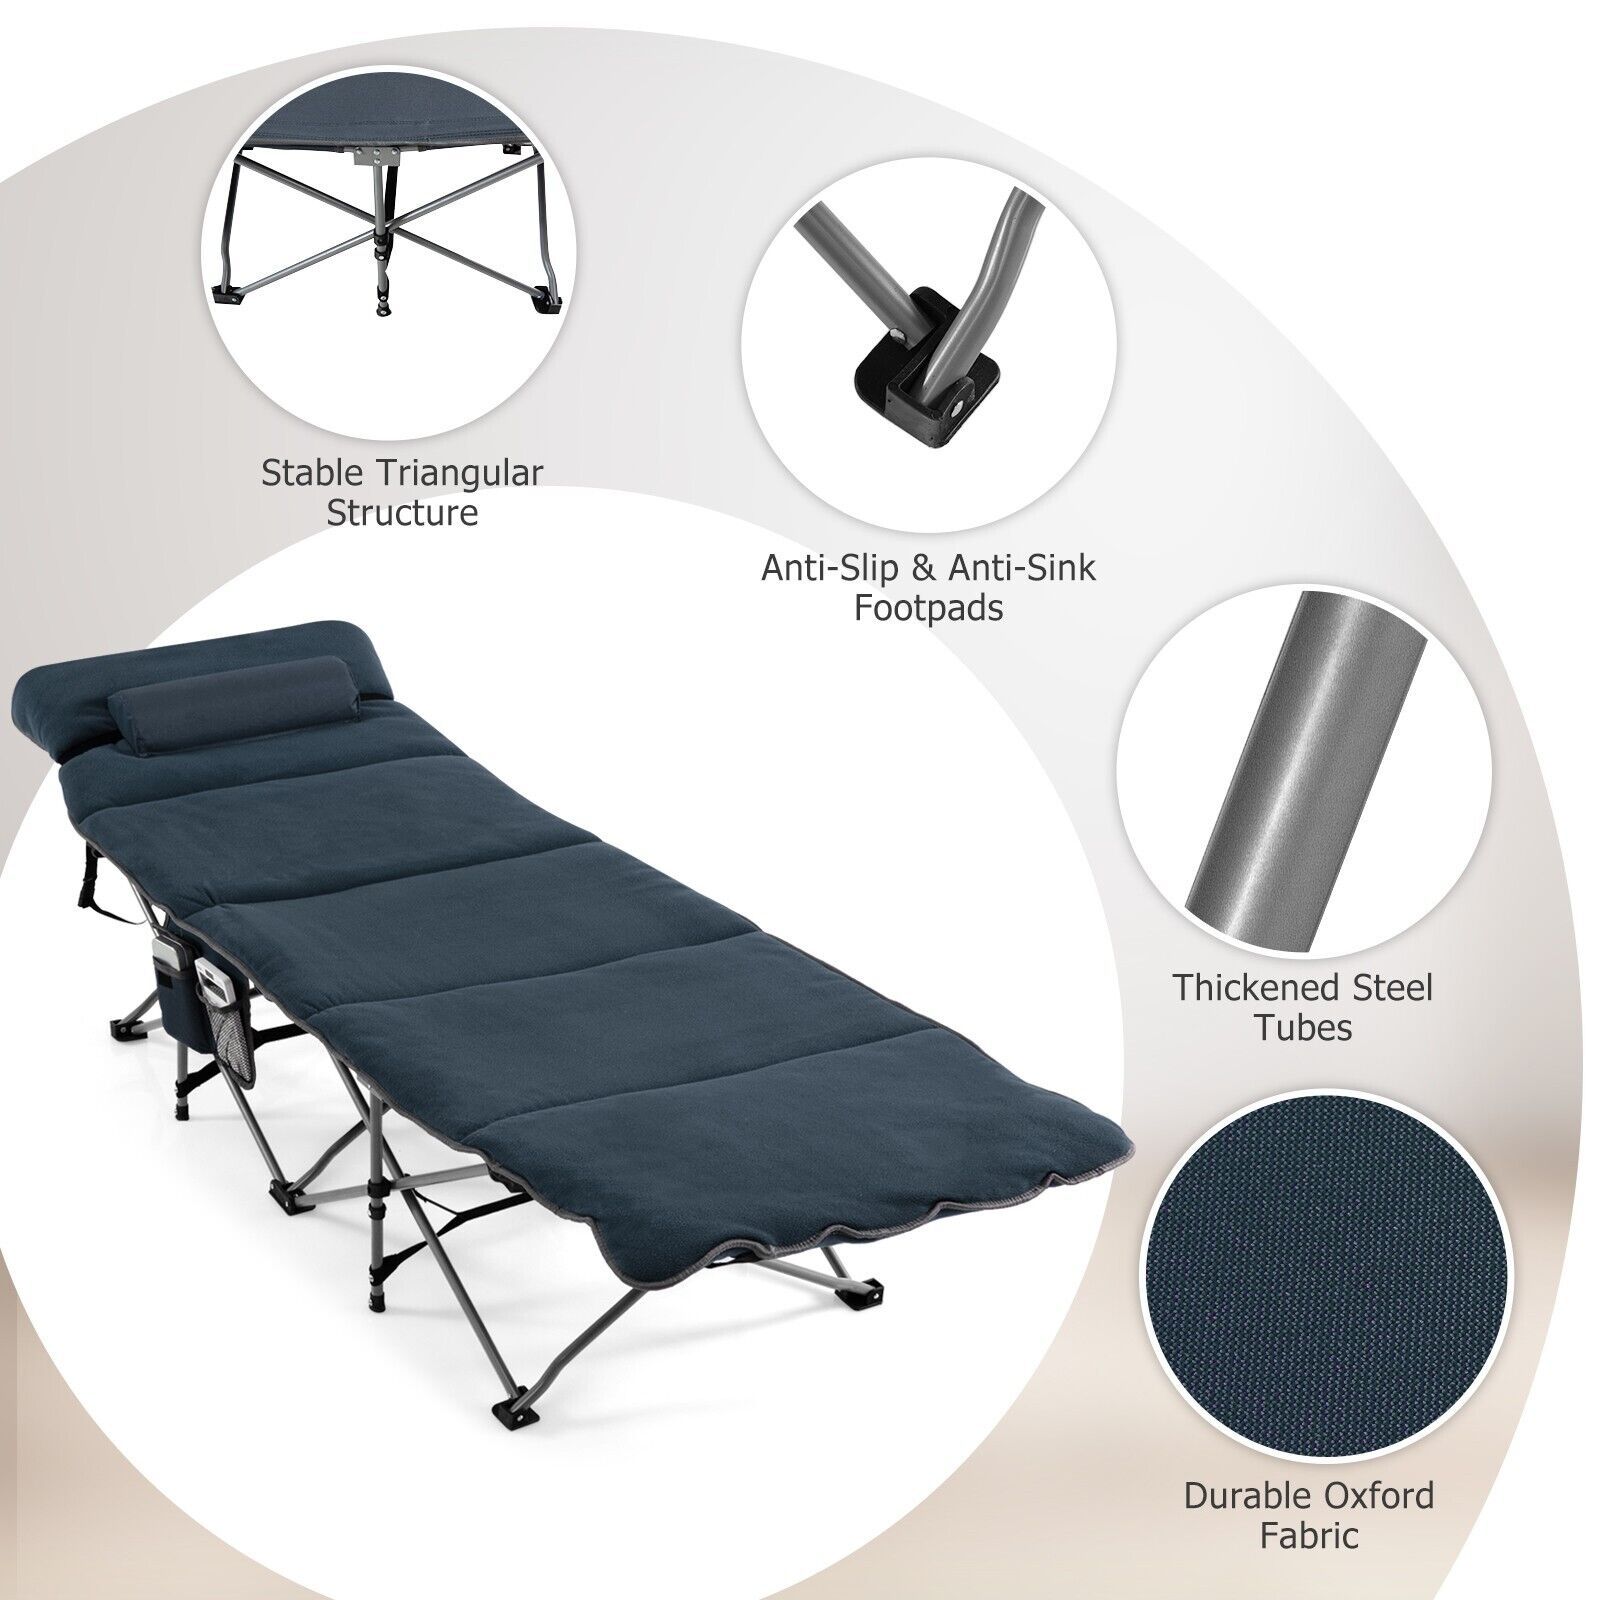 Portable Folding Camping Cot with Removable Mattress and Carry Bag